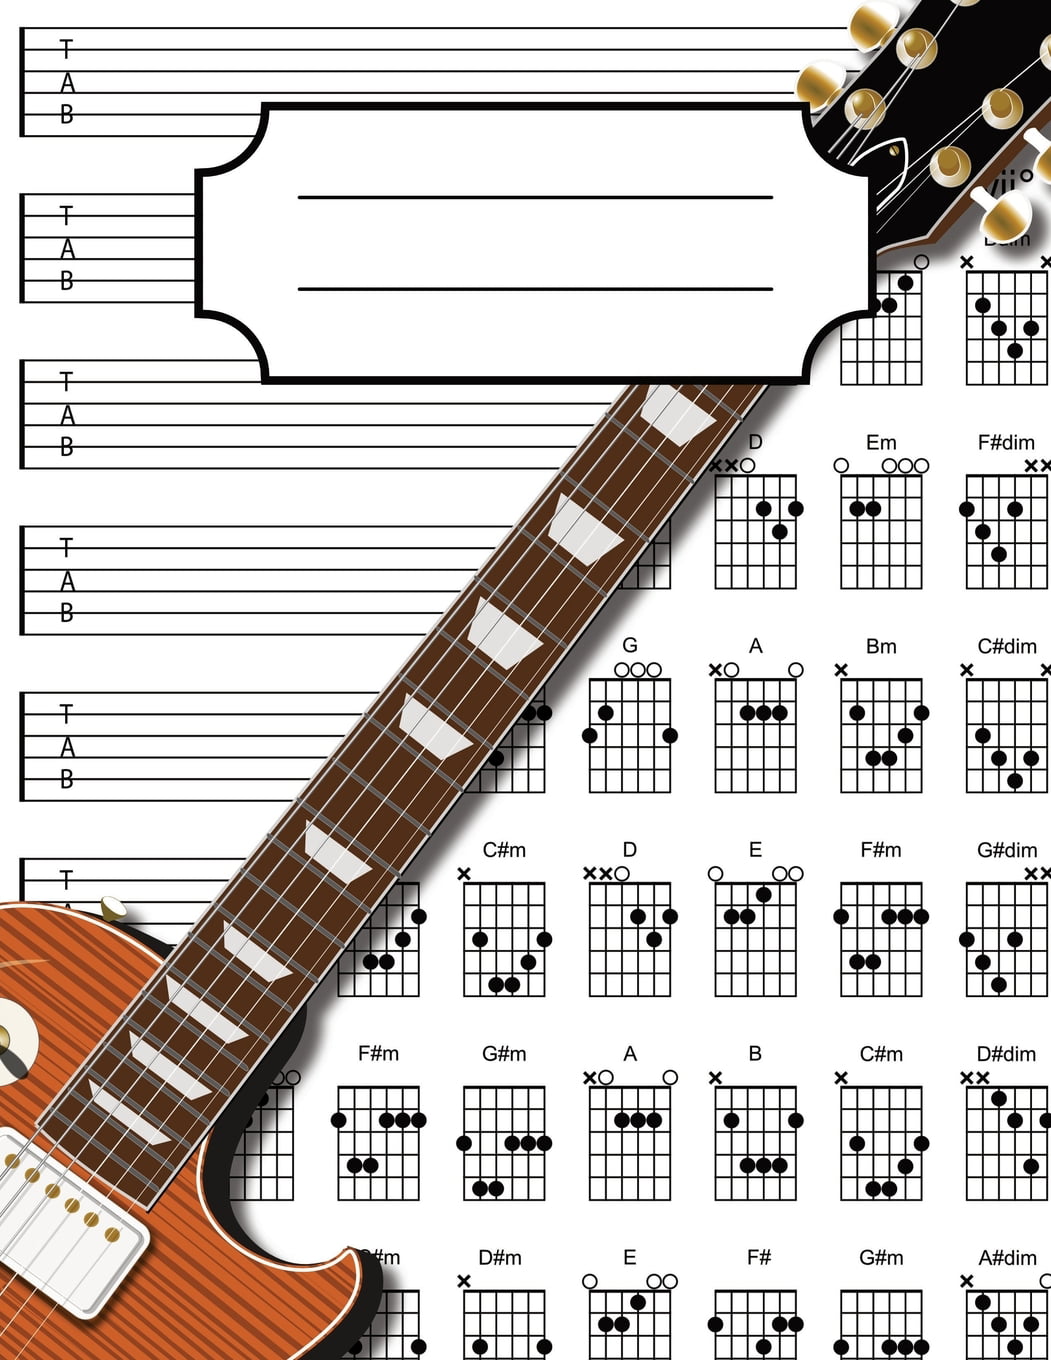 Guitar Tab Notebook Blank Guitar Tablature Writing Paper With Chord